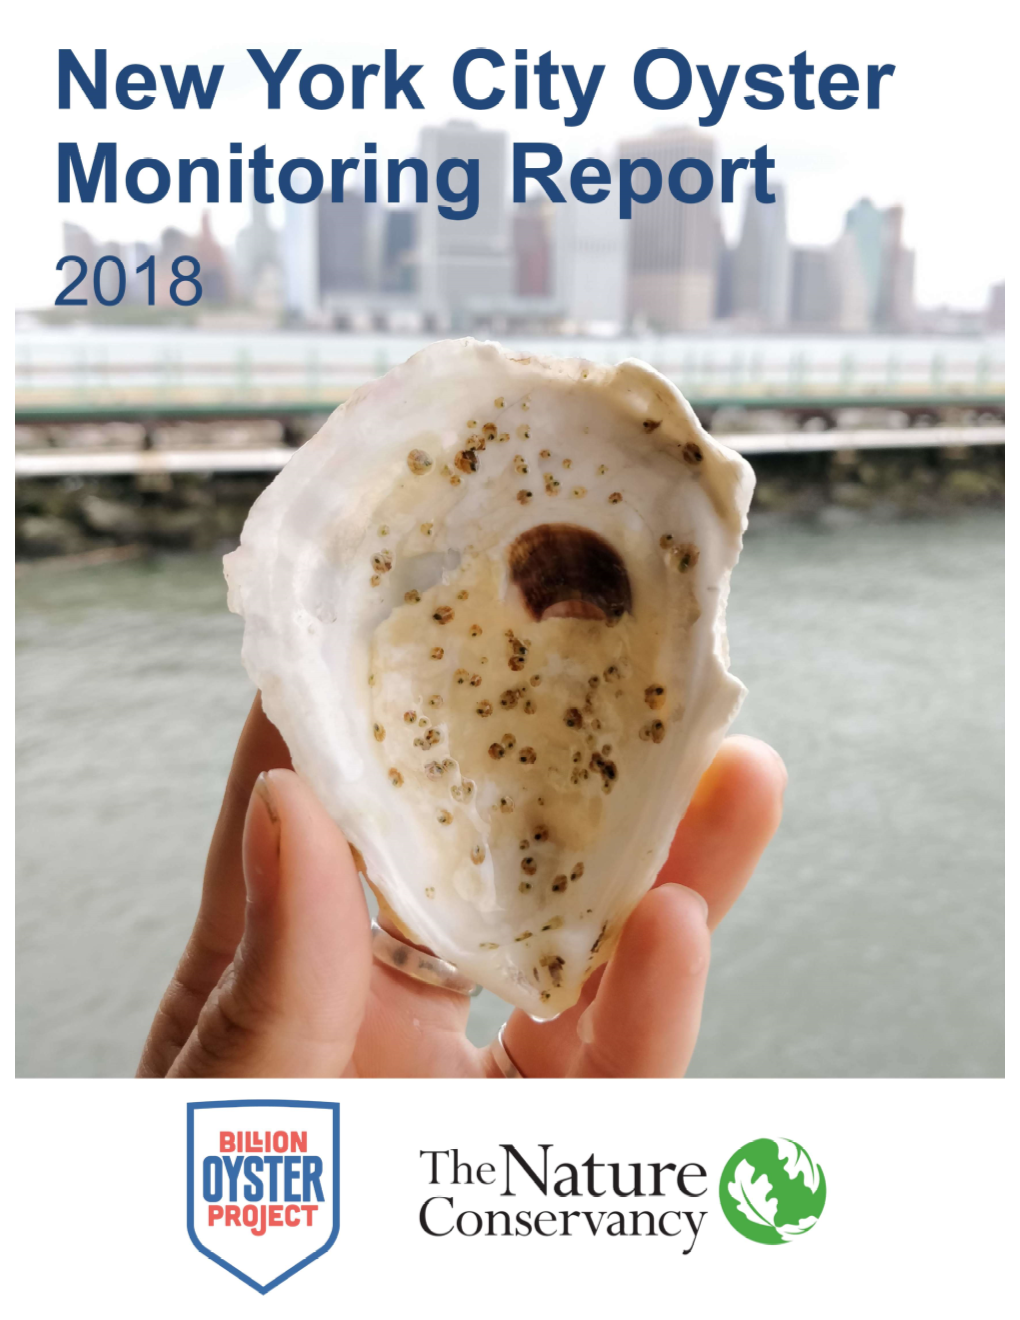 New York City Oyster Monitoring Report: 2018